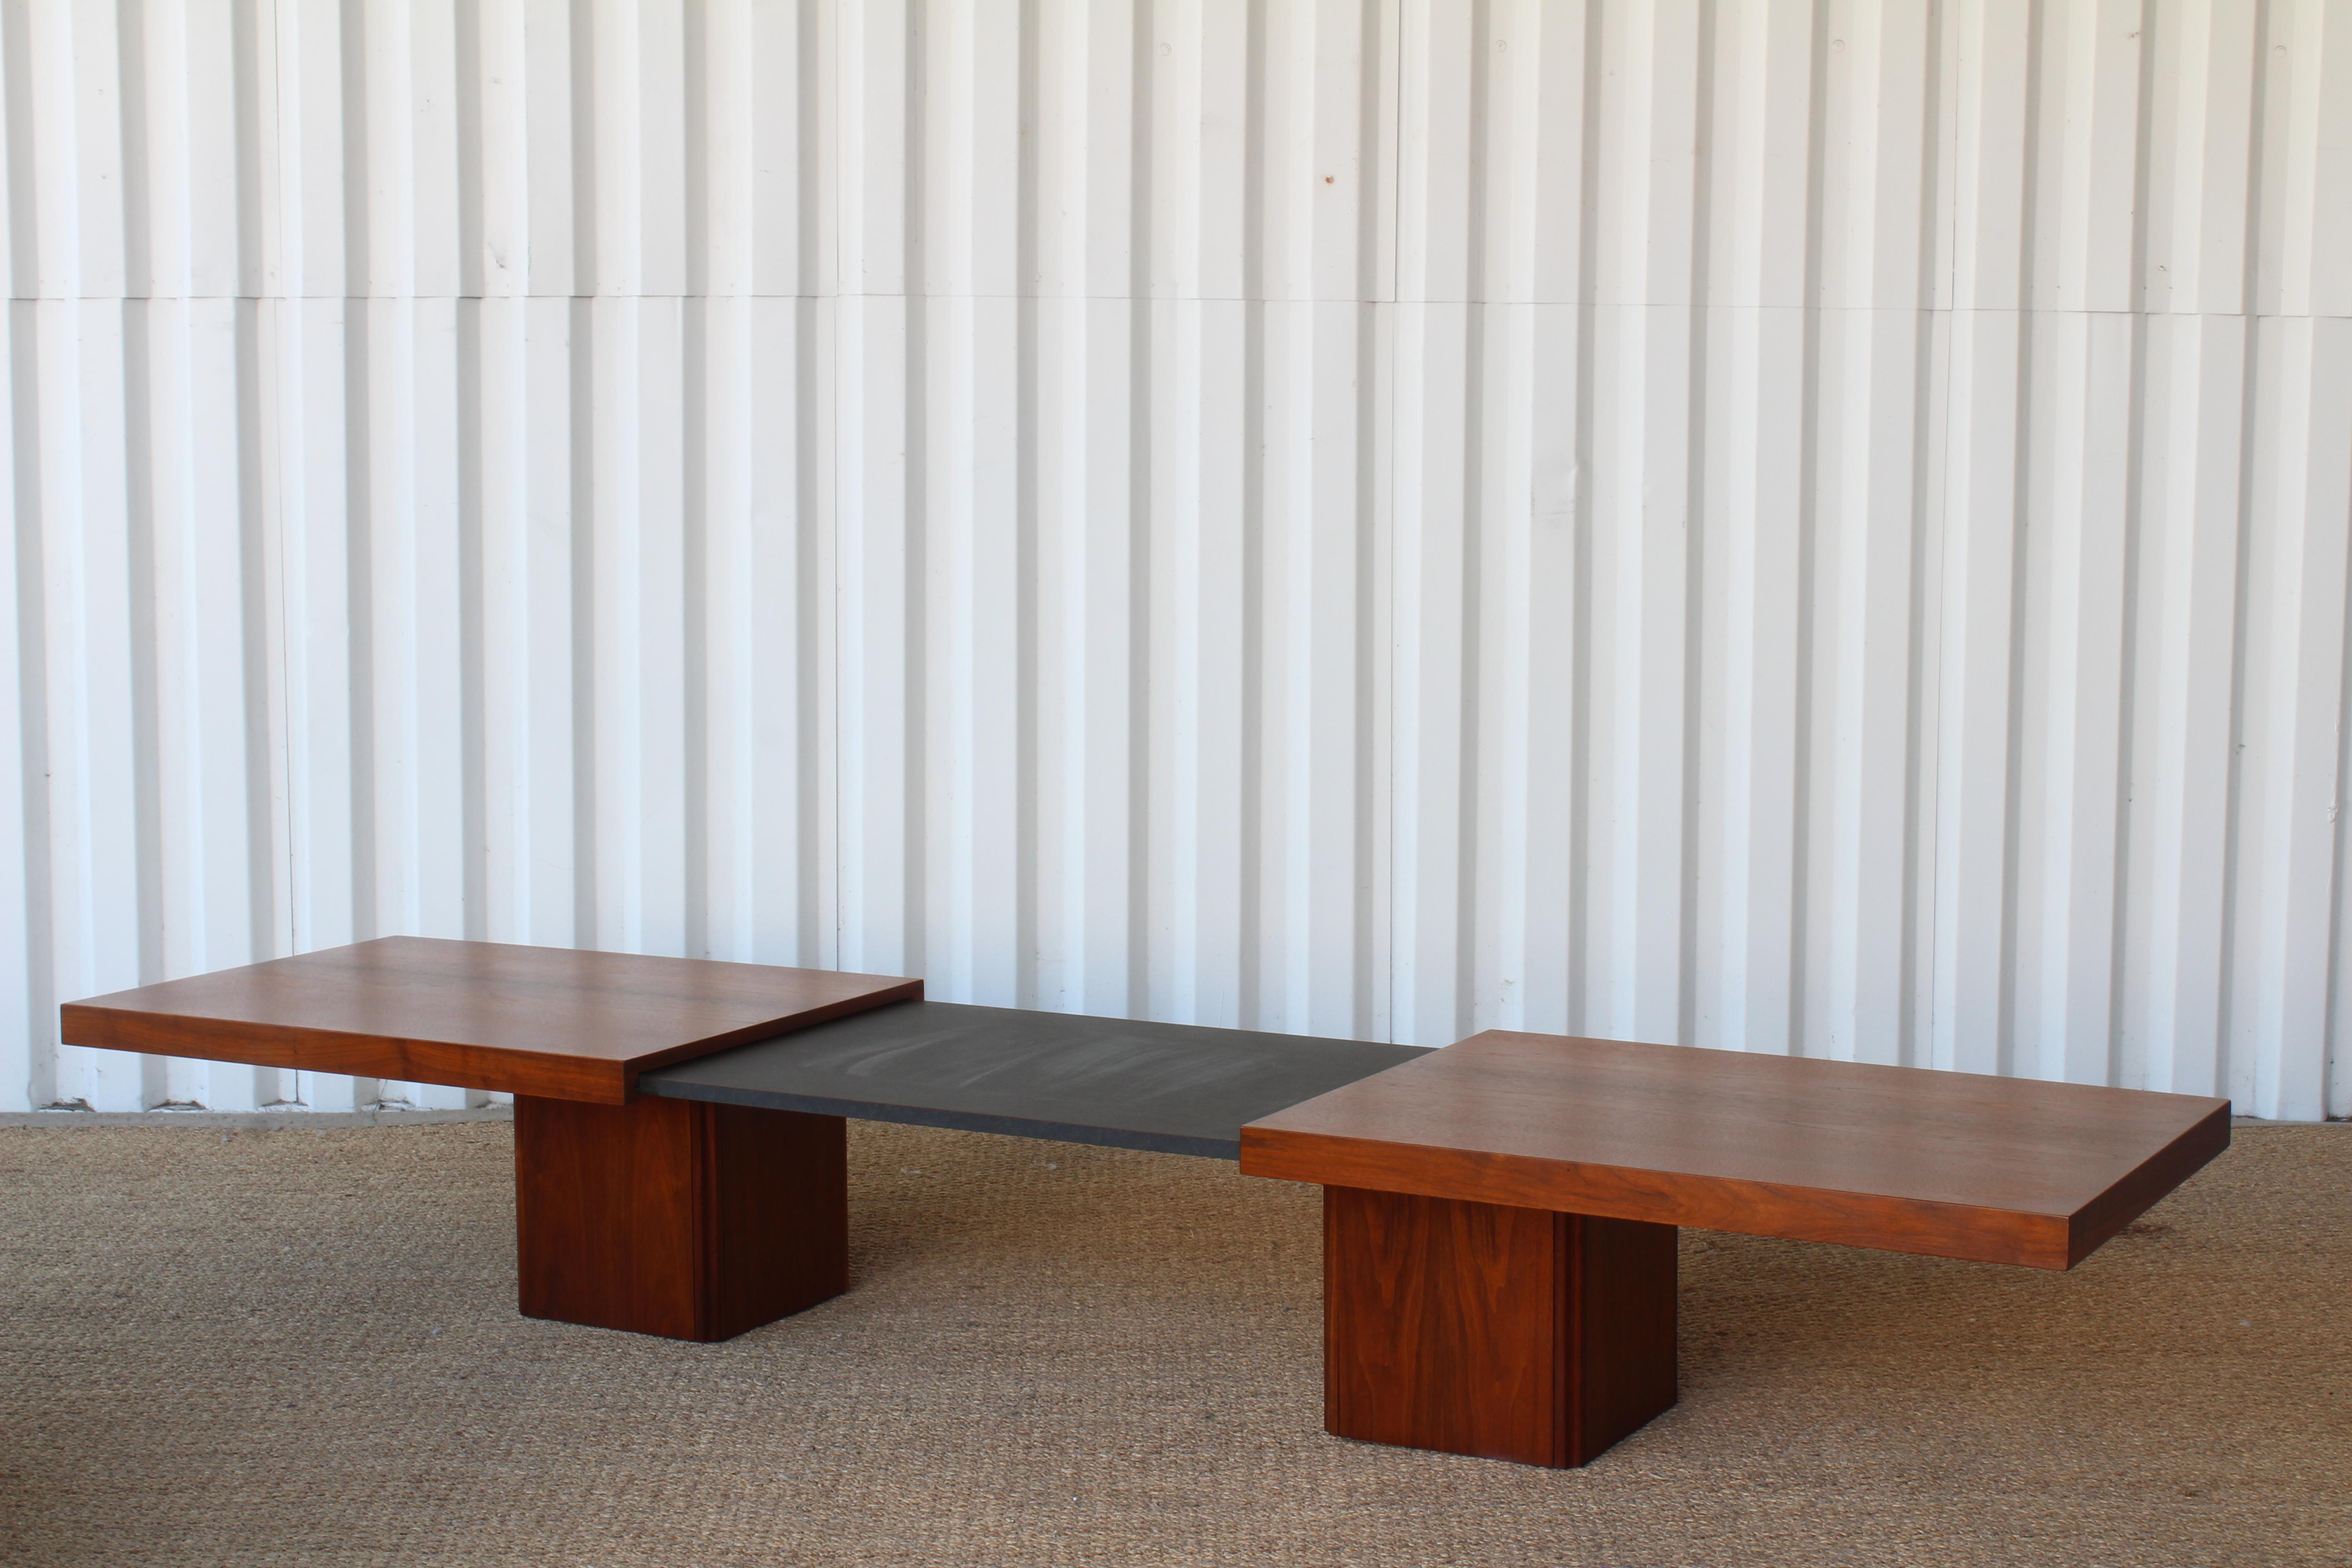 1960s expandable coffee table in walnut, designed by John Keal for Brown Saltman, U.S.A expands to reveal a laminate surface underneath. Measures from 66